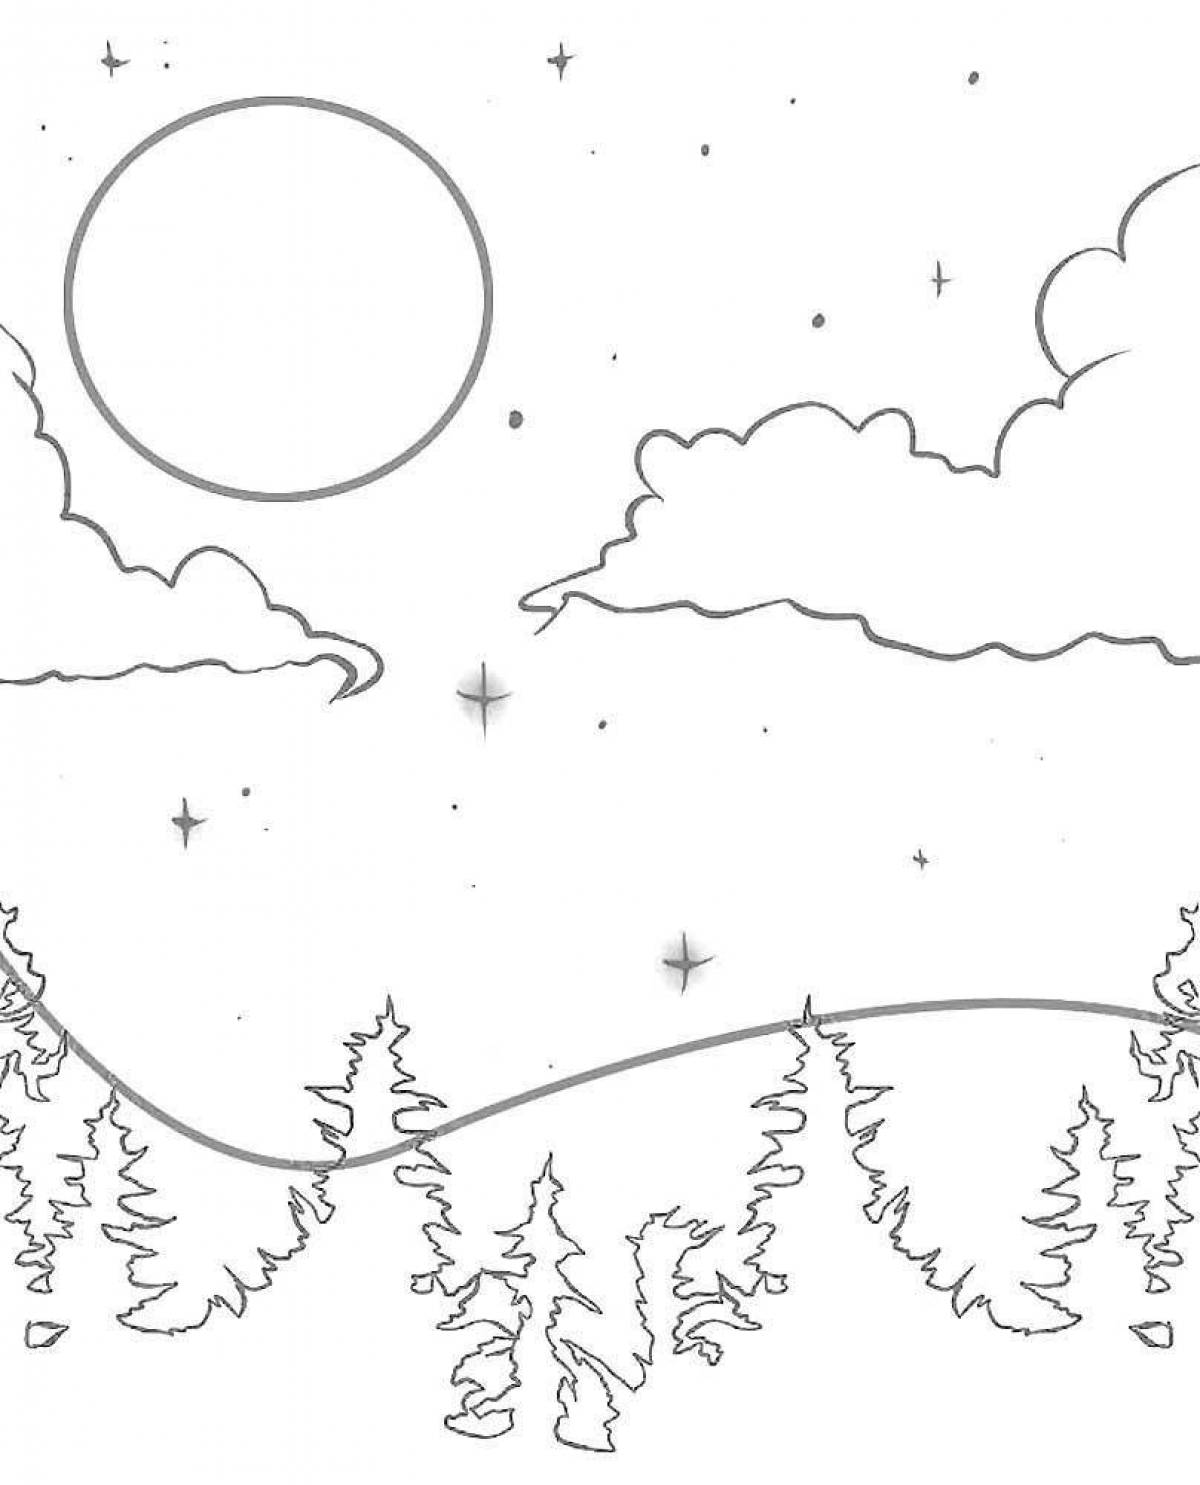 Awesome sky coloring page